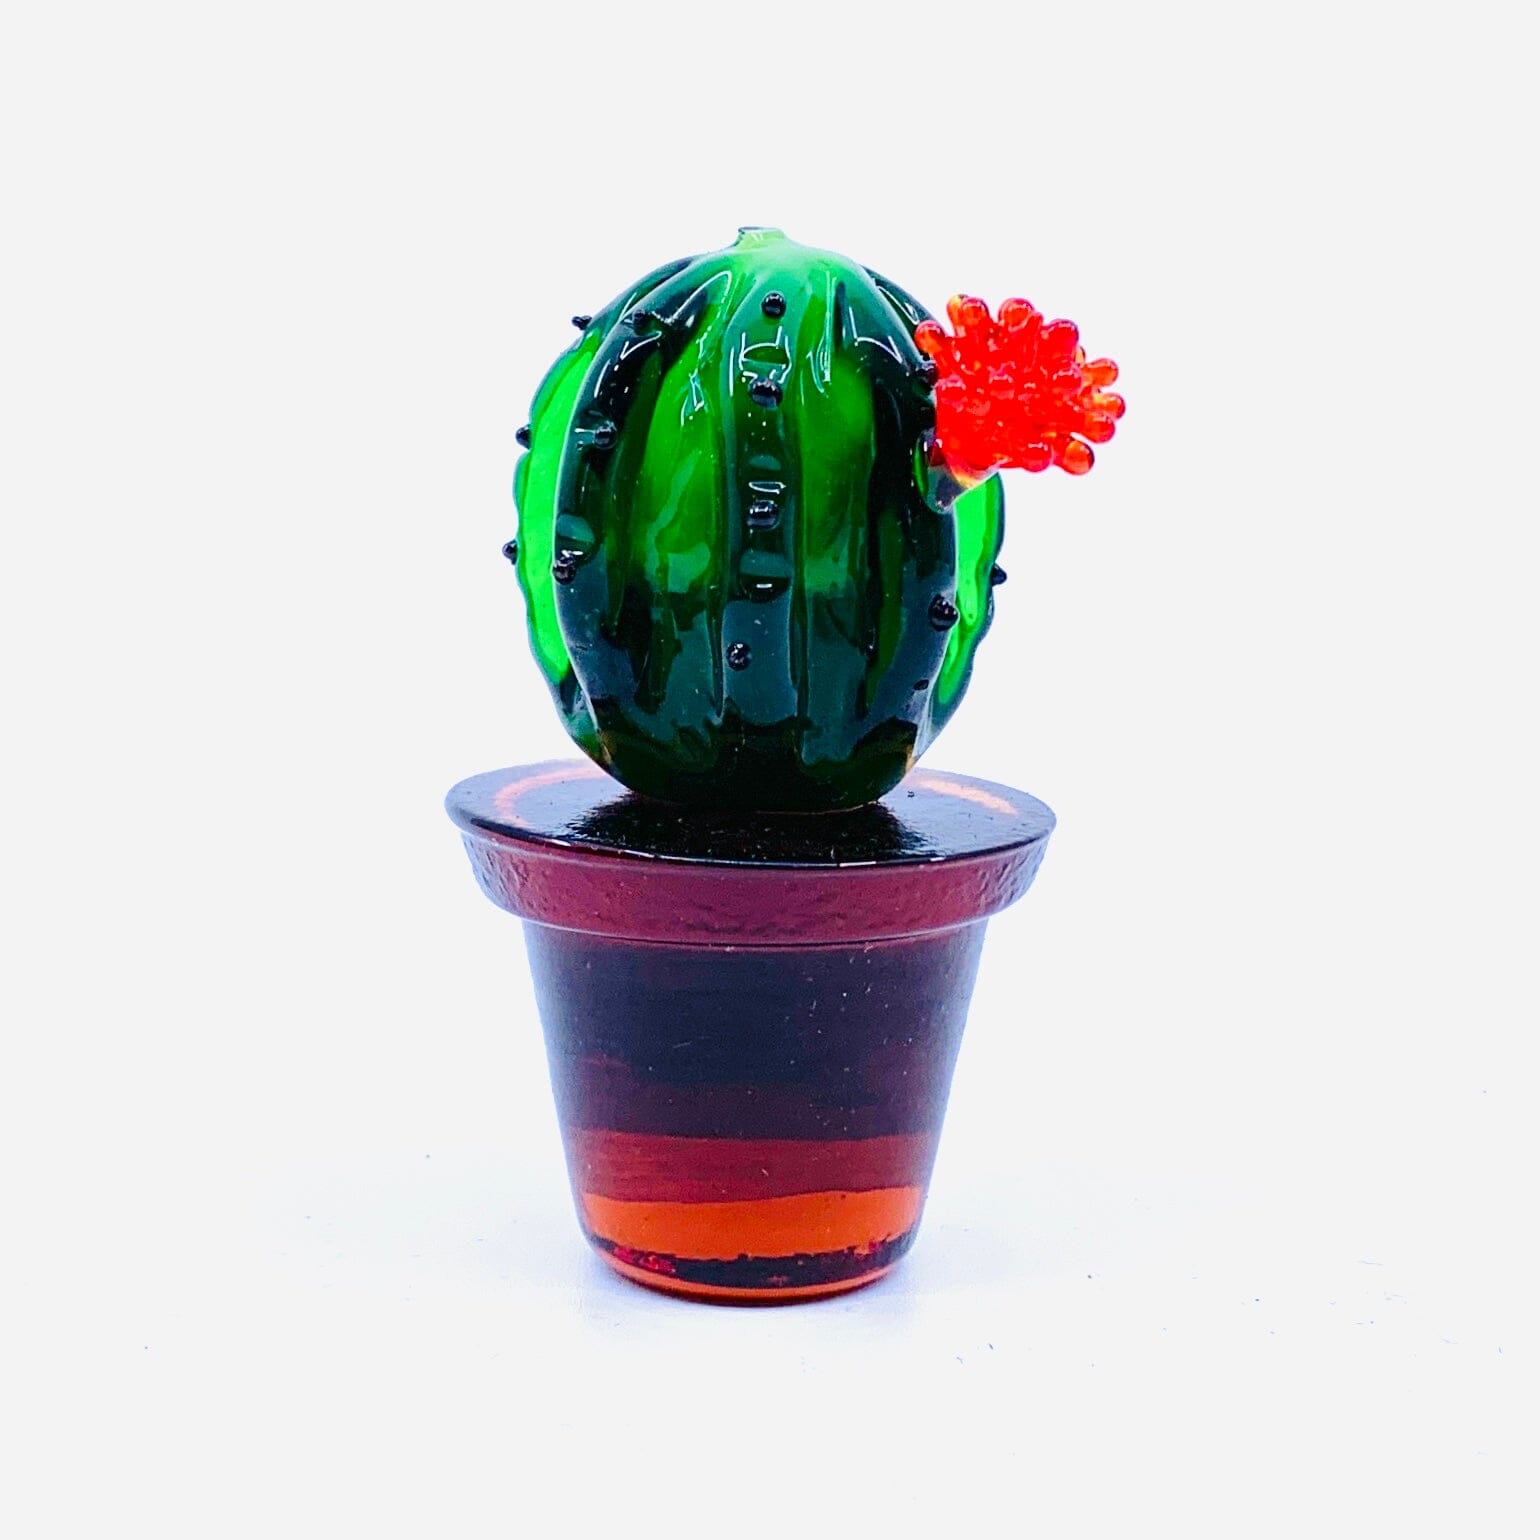 Emotional Support Pocket Cactus, 1 Miniature Dynasty 